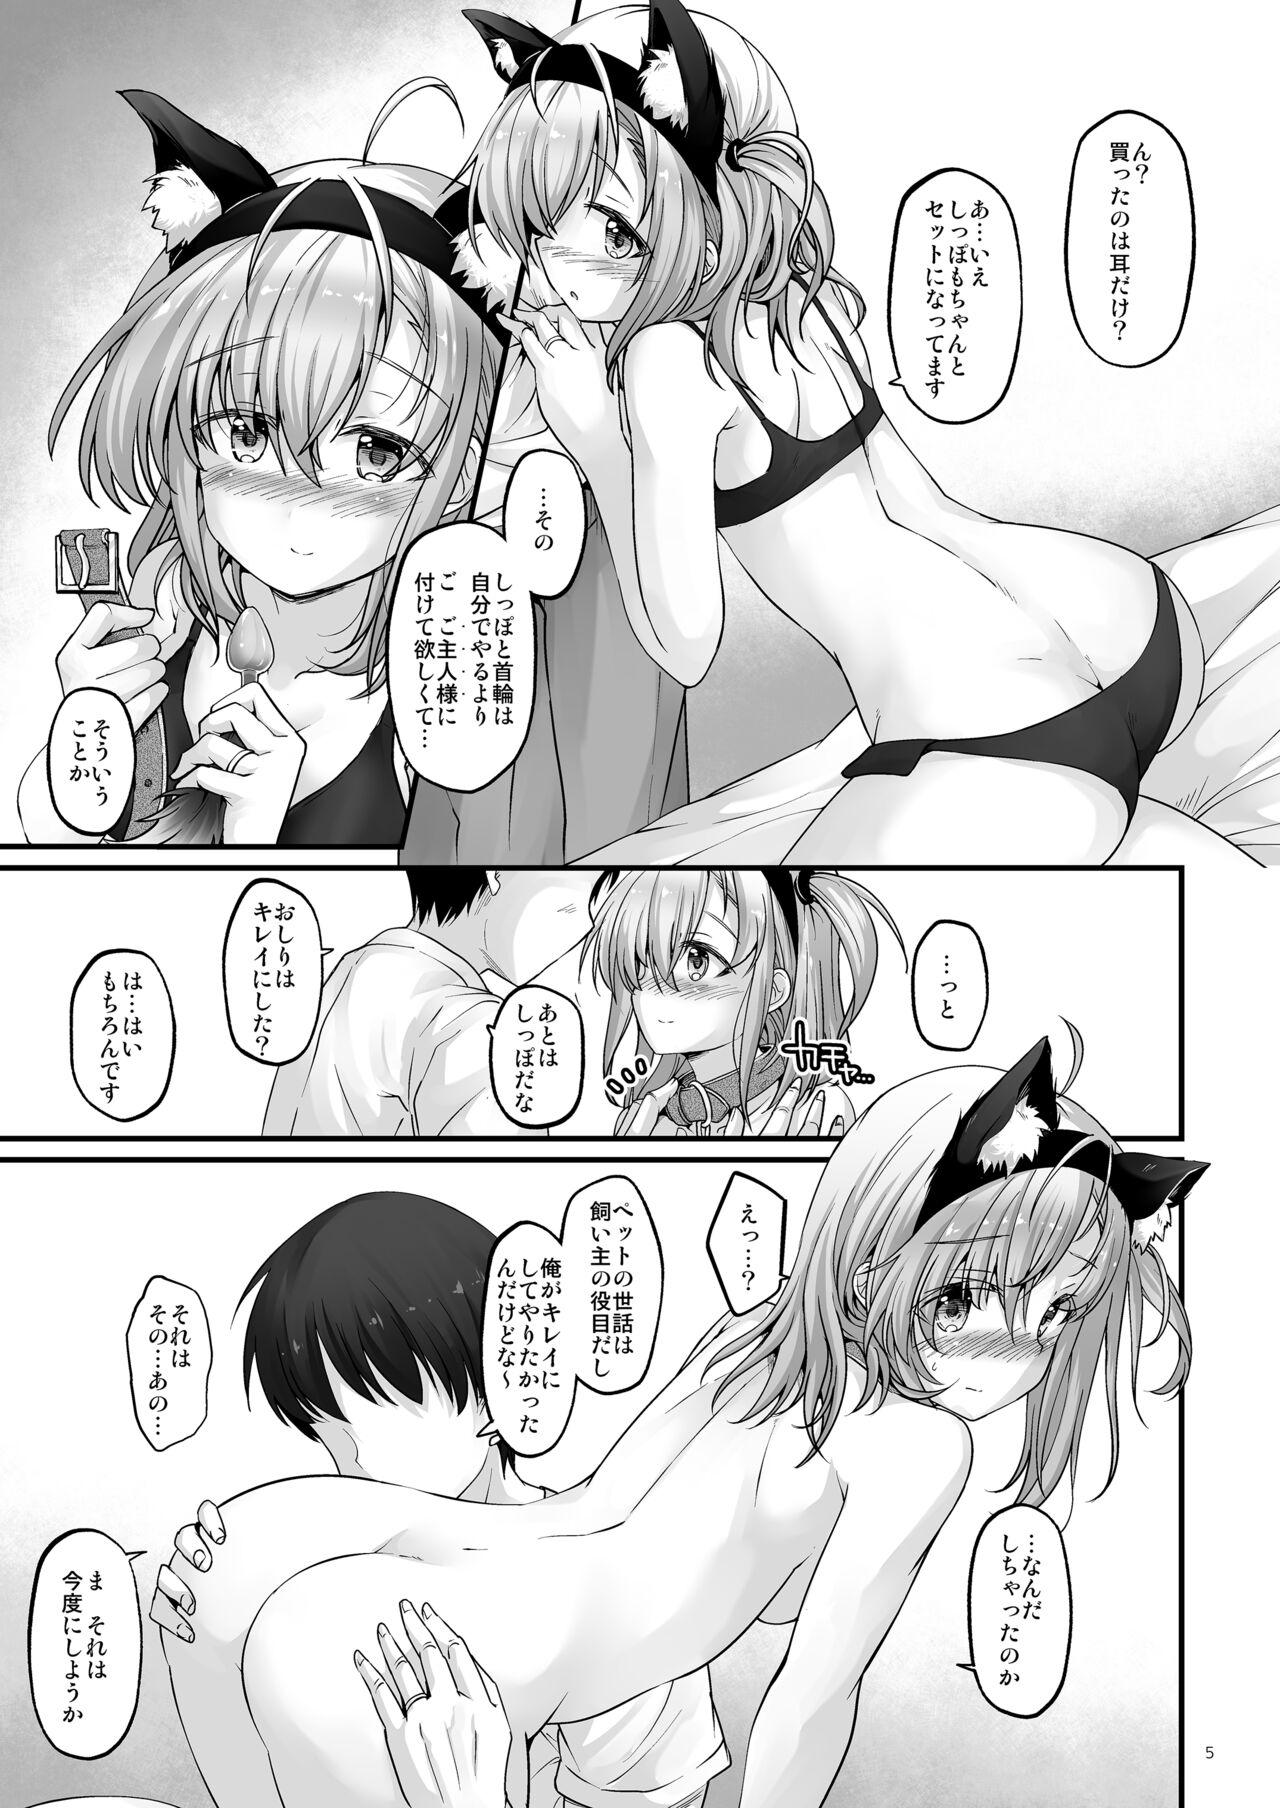 Moan Howling Moon - Kantai collection Teenxxx - Page 5